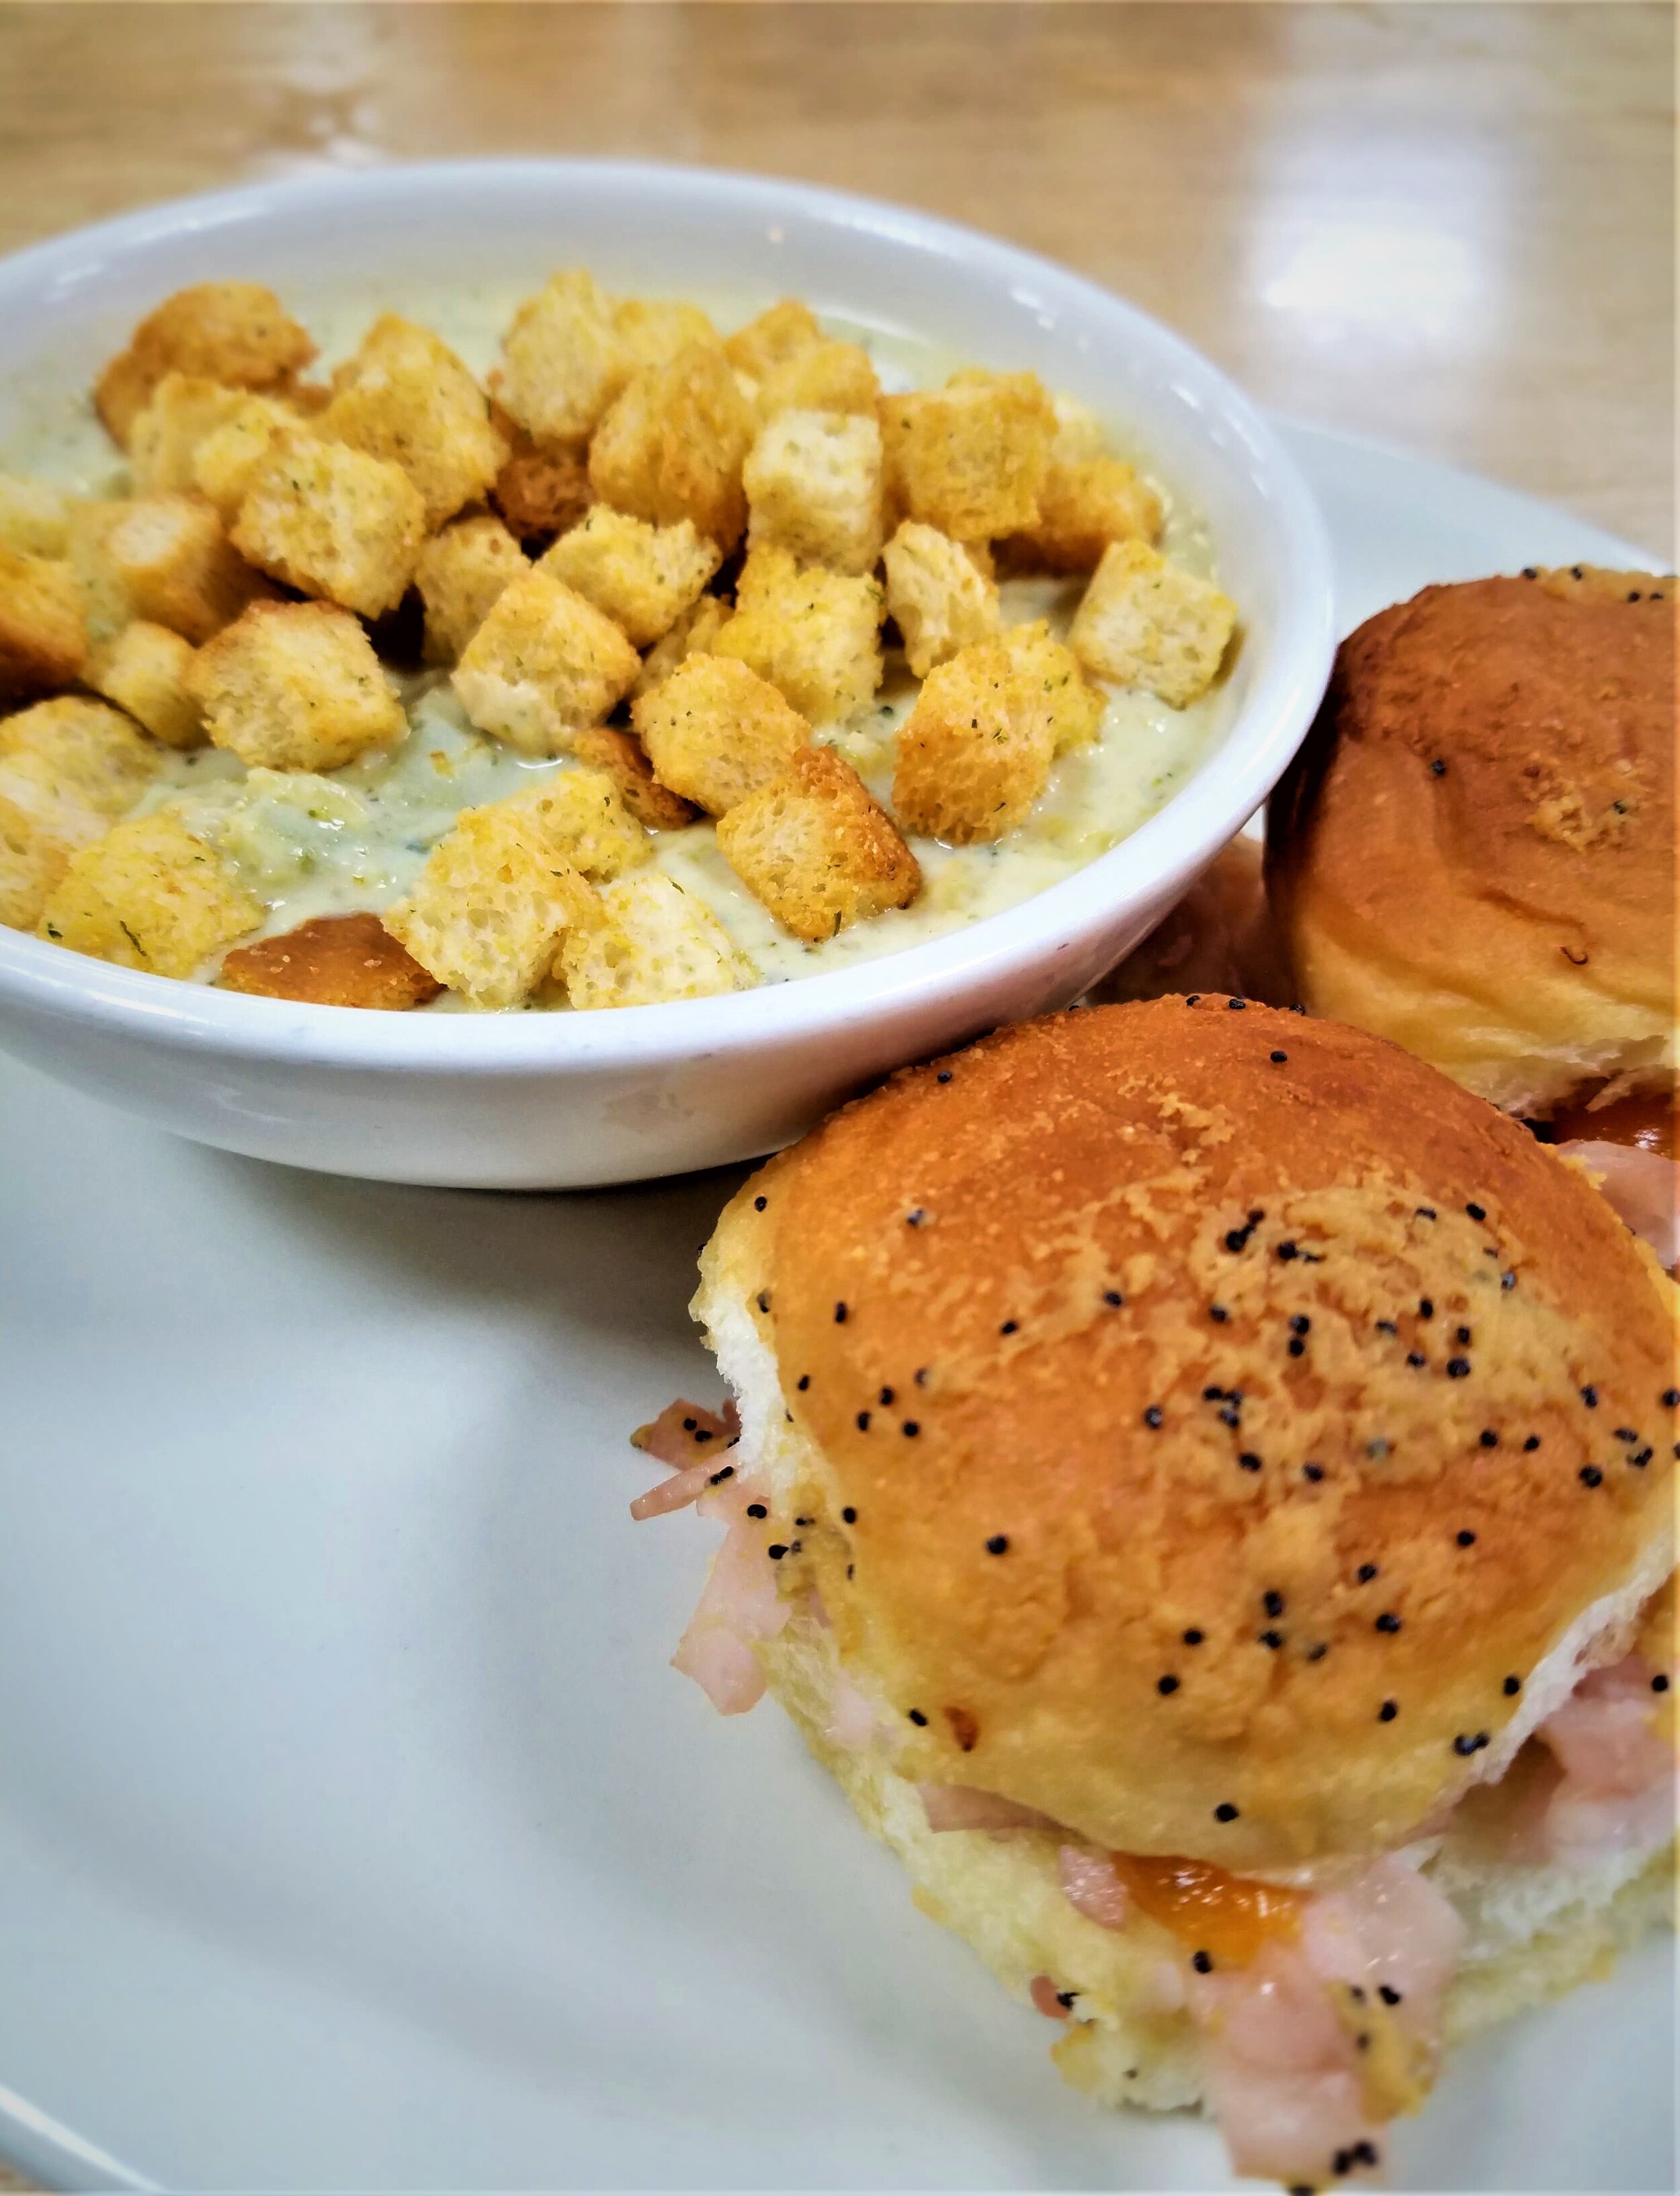 Broccoli Cheddar Soup and Turkey Cheese Sliders